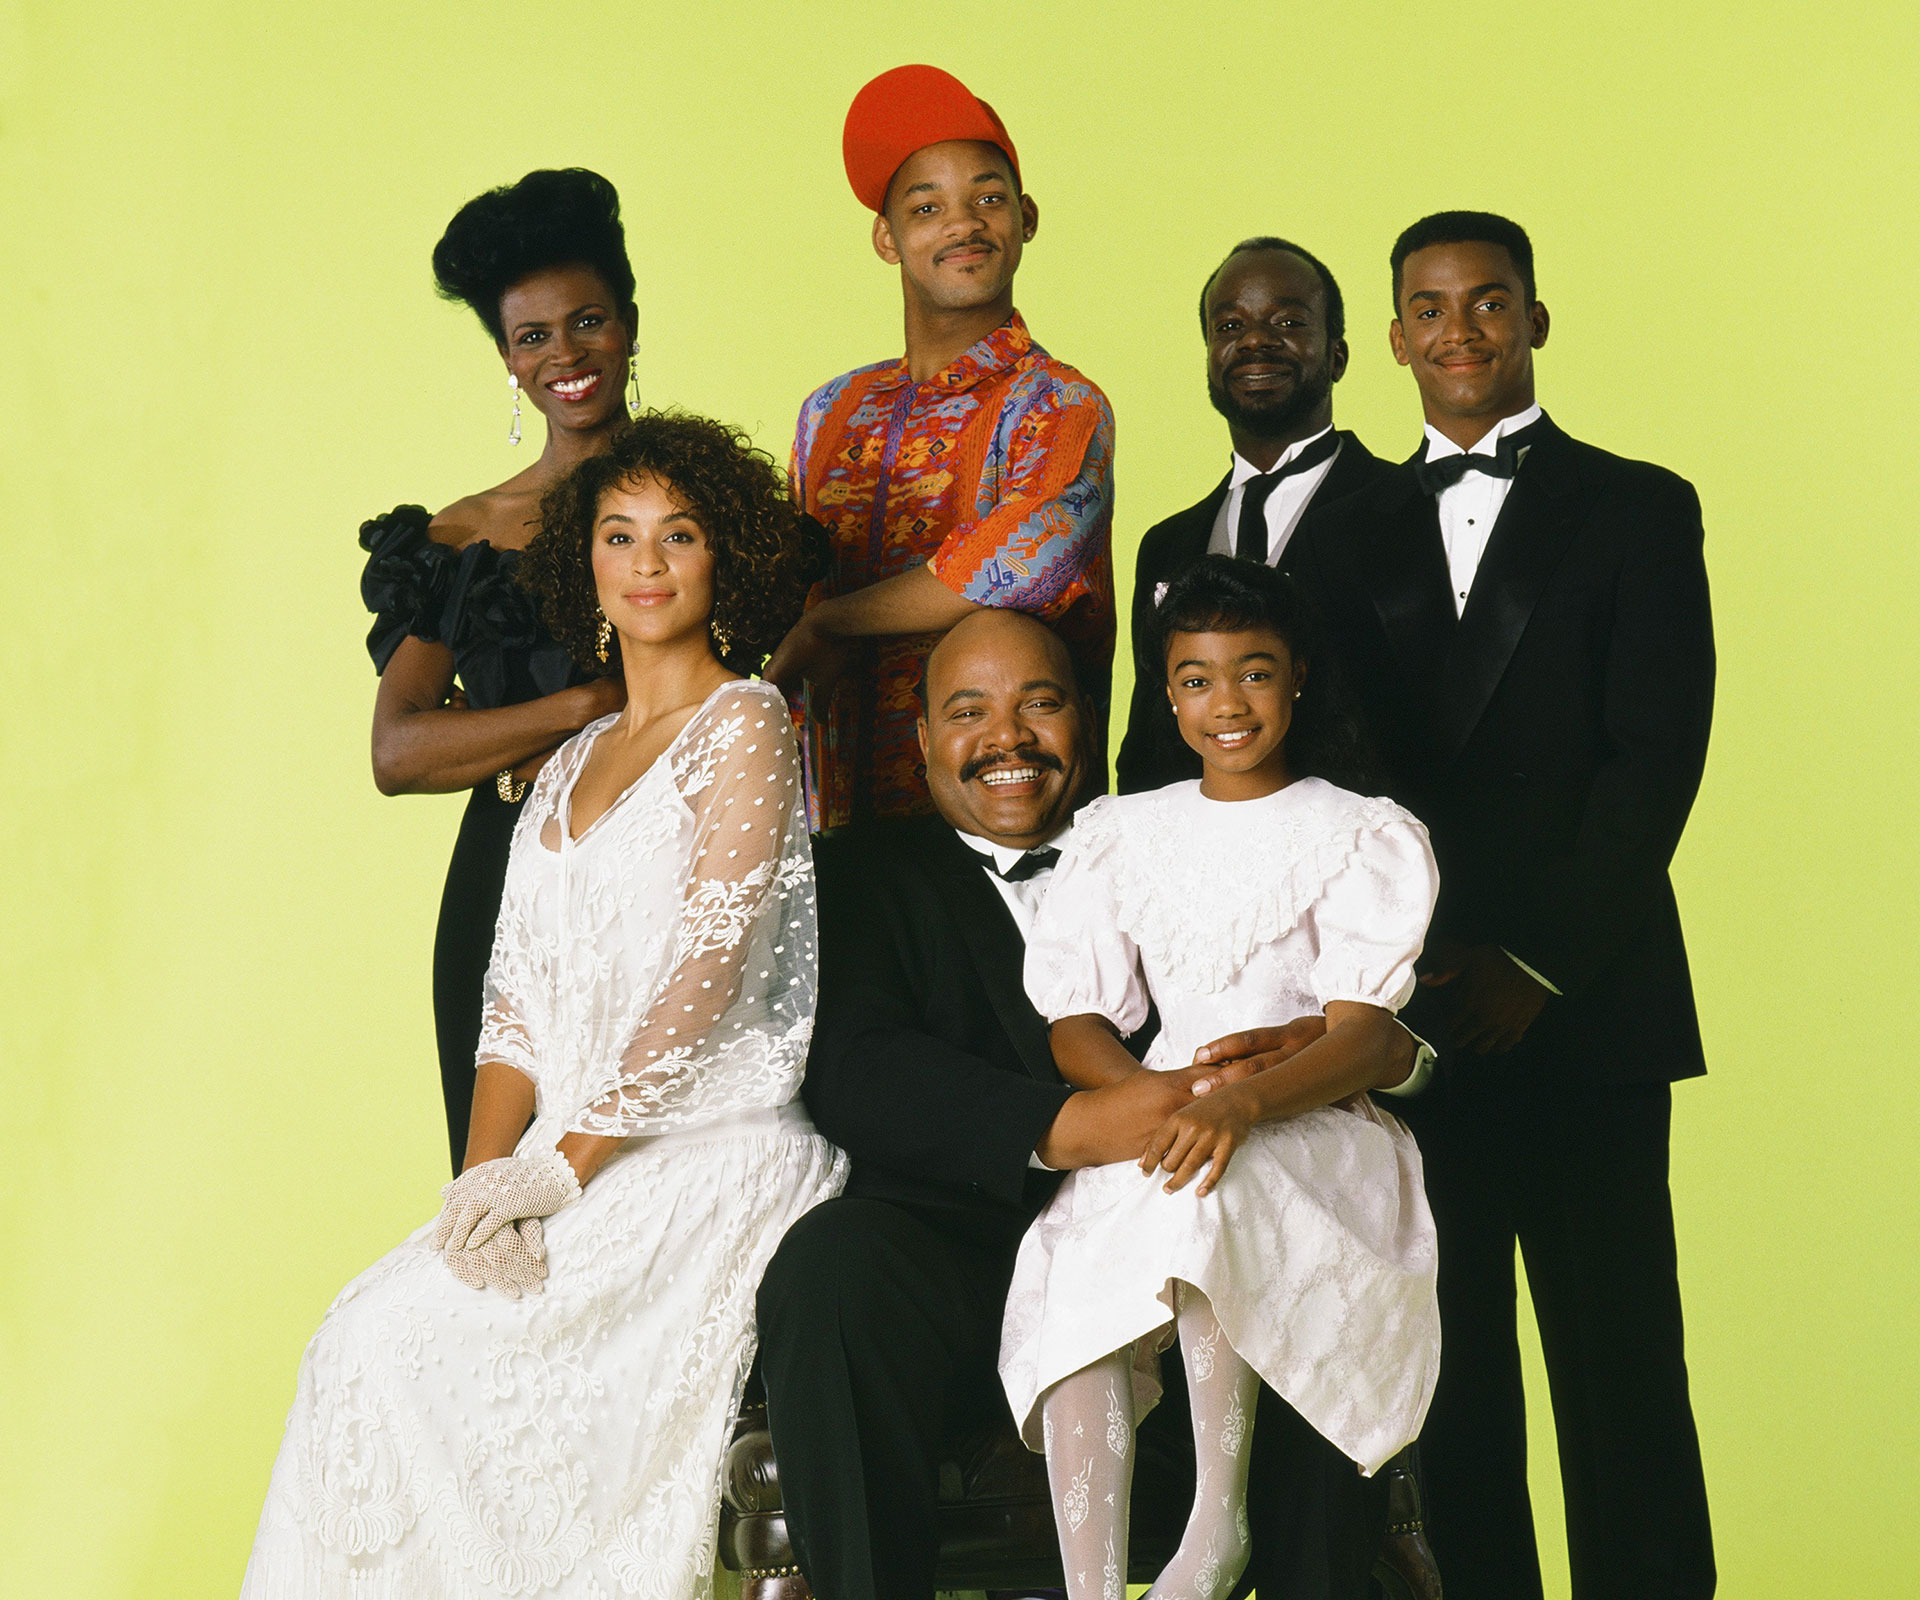 The cast of Fresh Prince of Bel Air